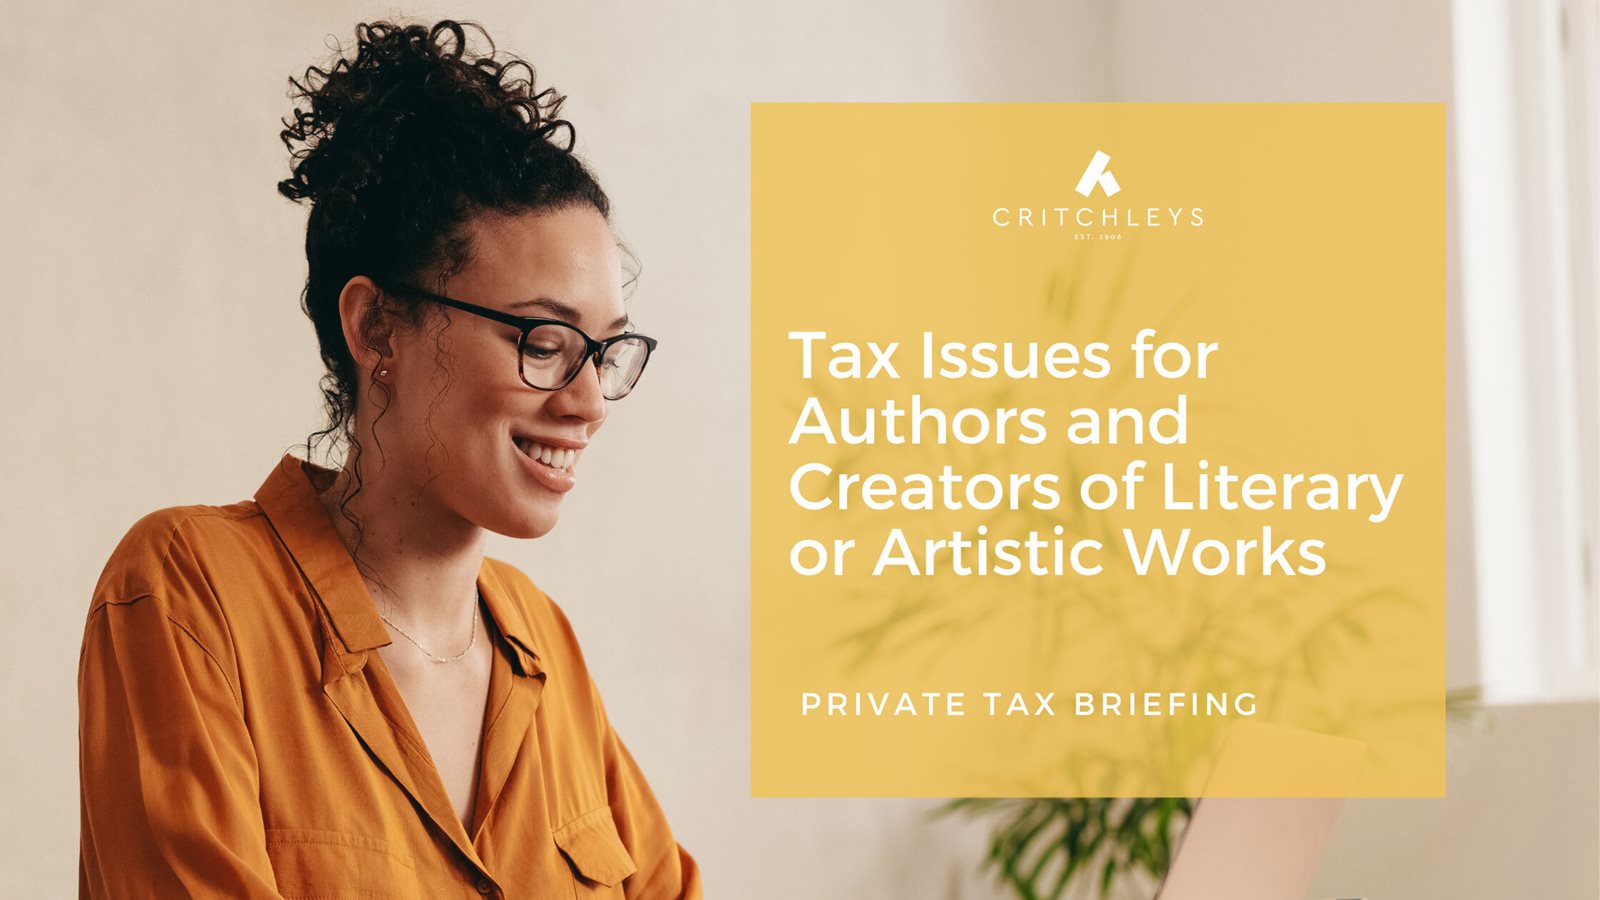 Tax Issues for Authors and Creators of Literary or Artistic Works